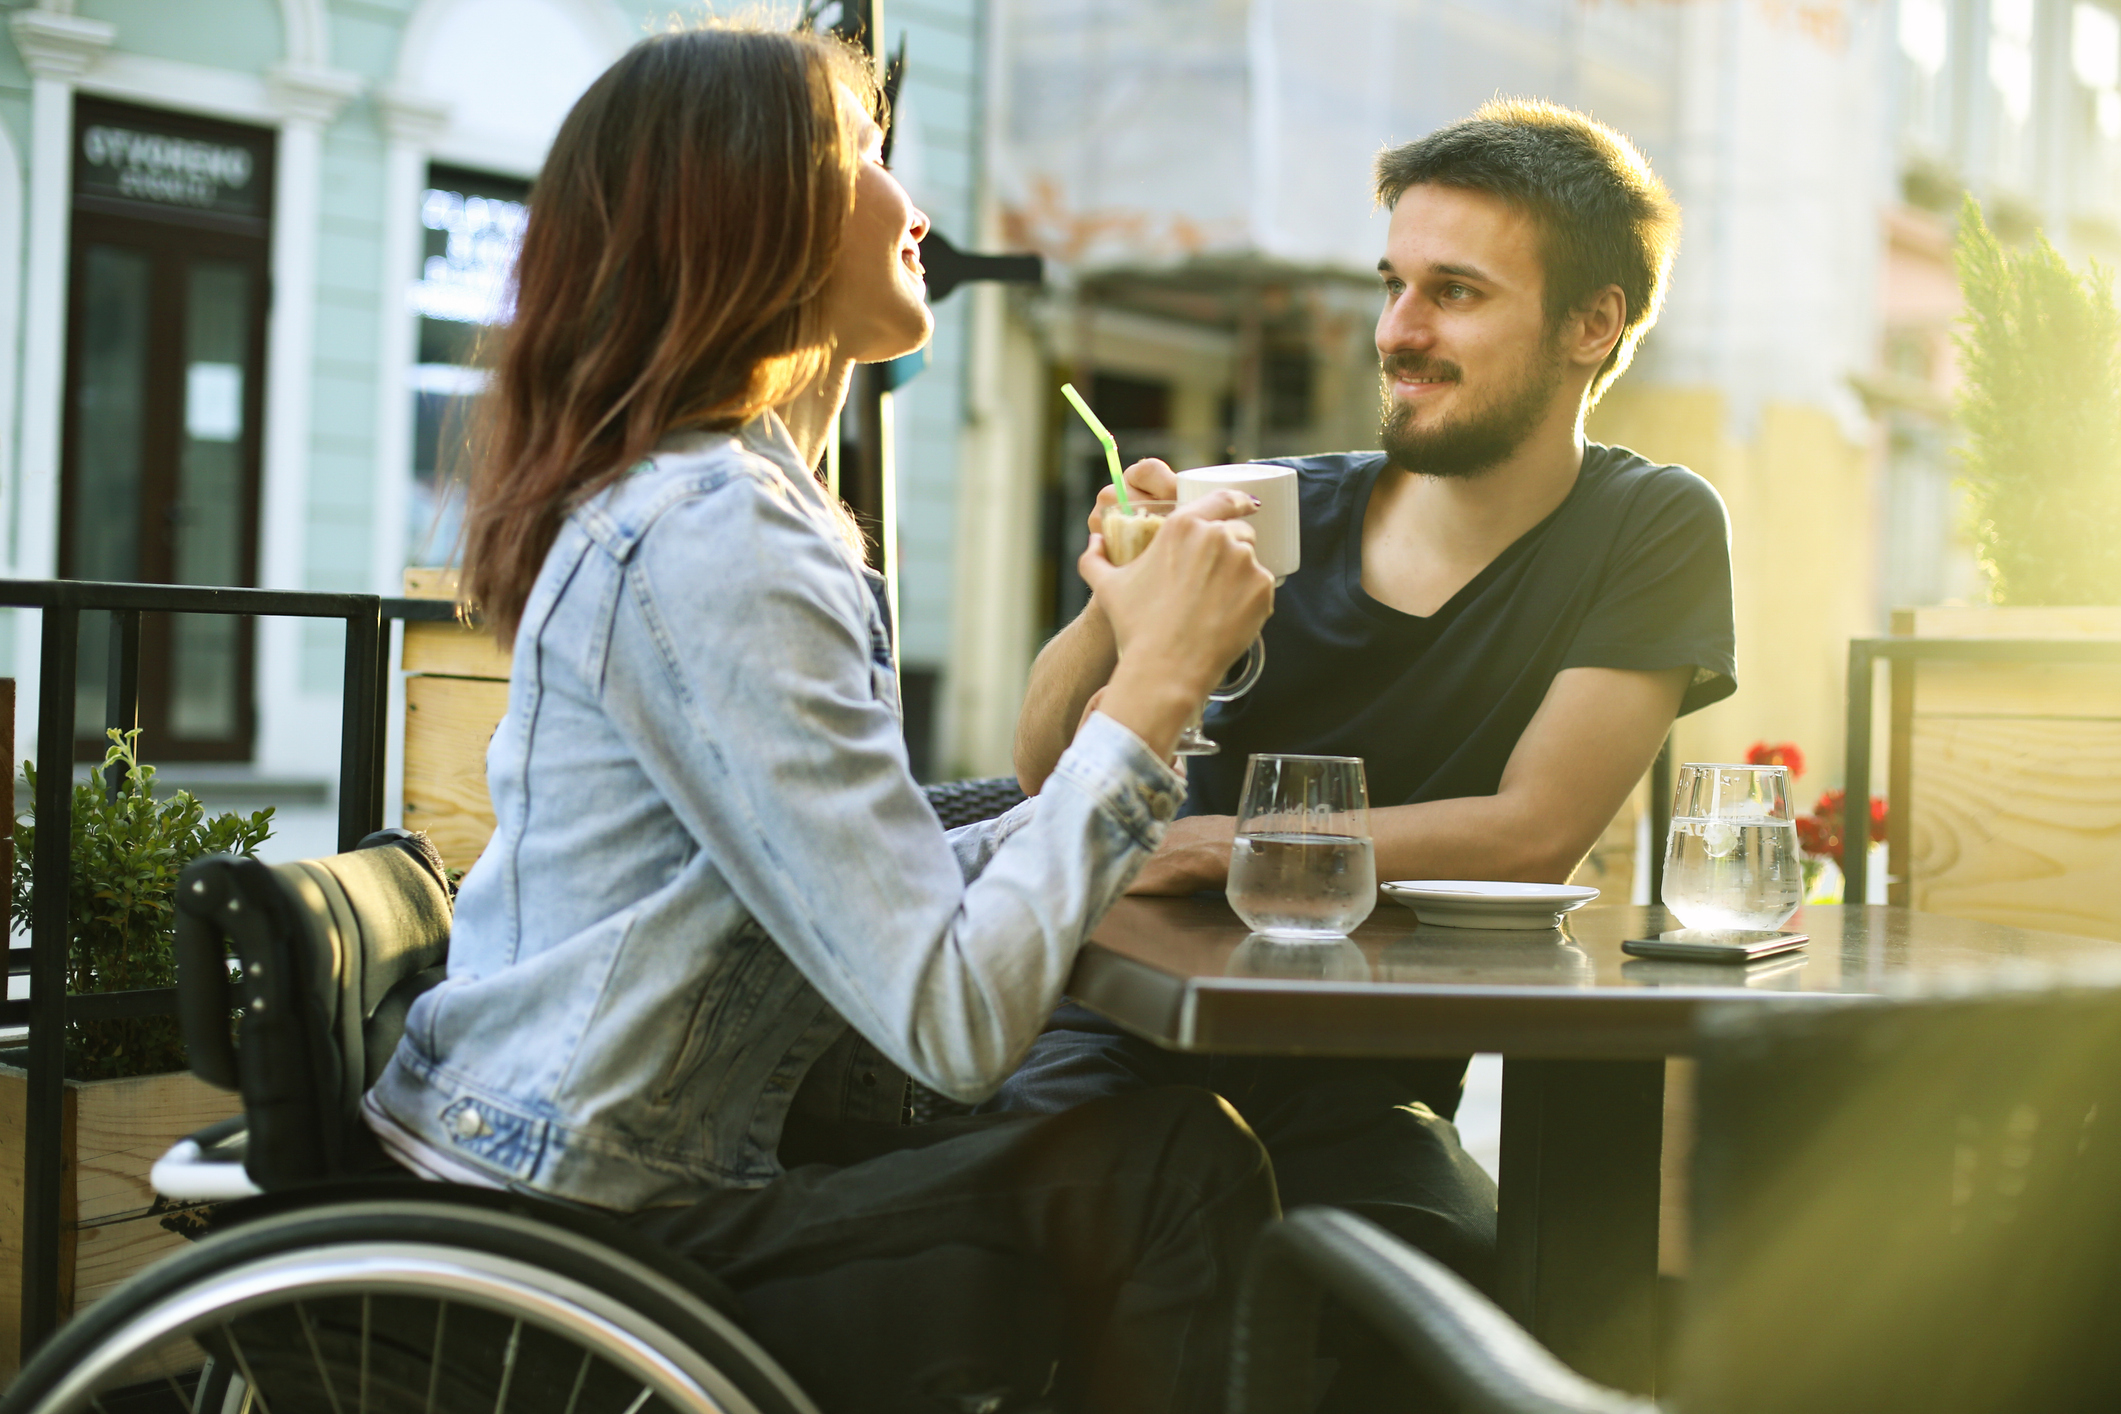 Woman using wheelchair sips coffee with her boyfriend.